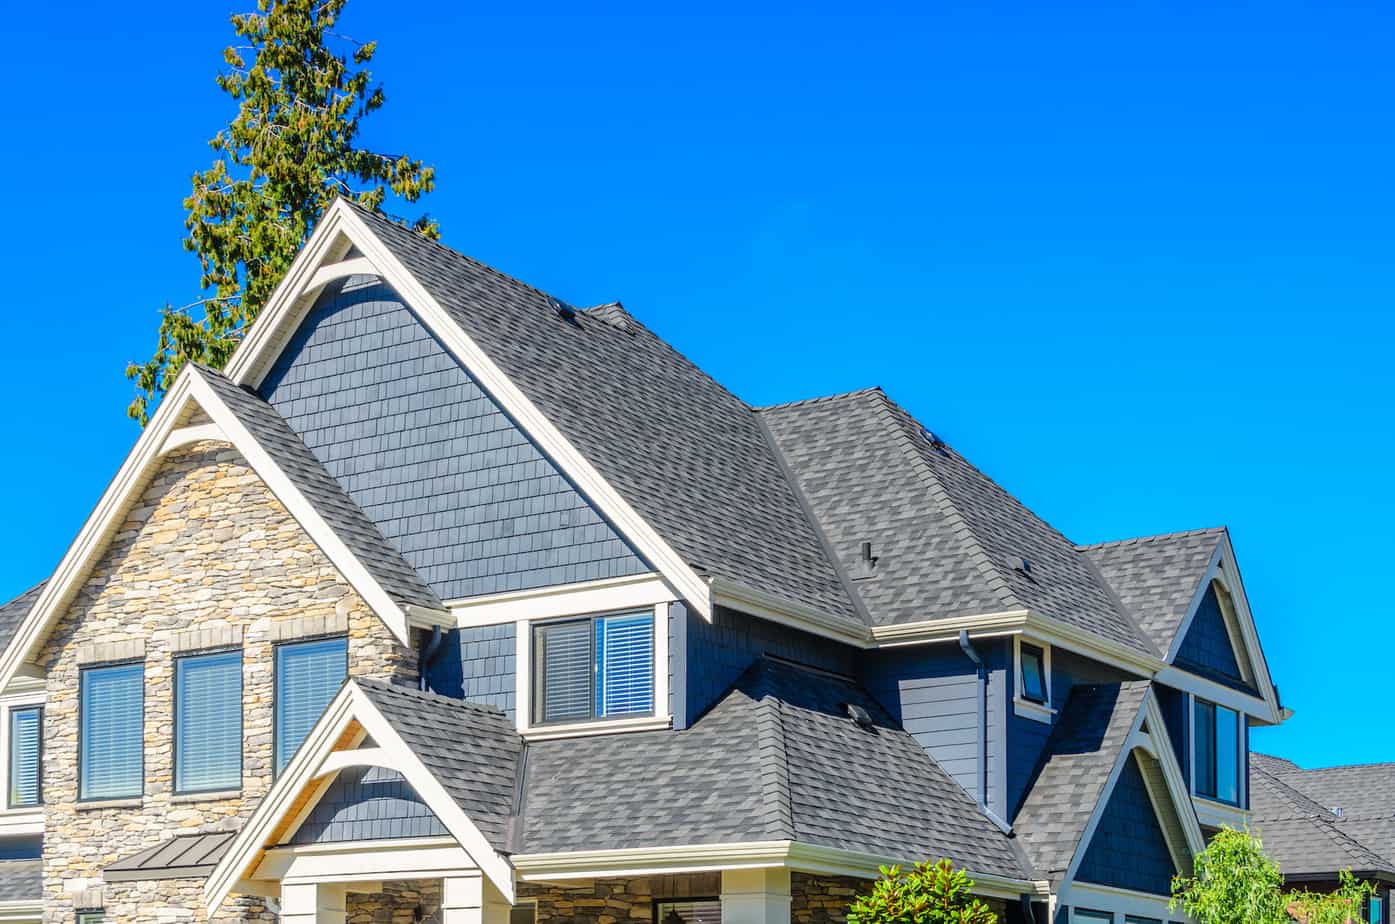 Roof Revival: Transformative Trends in Residential Roofing